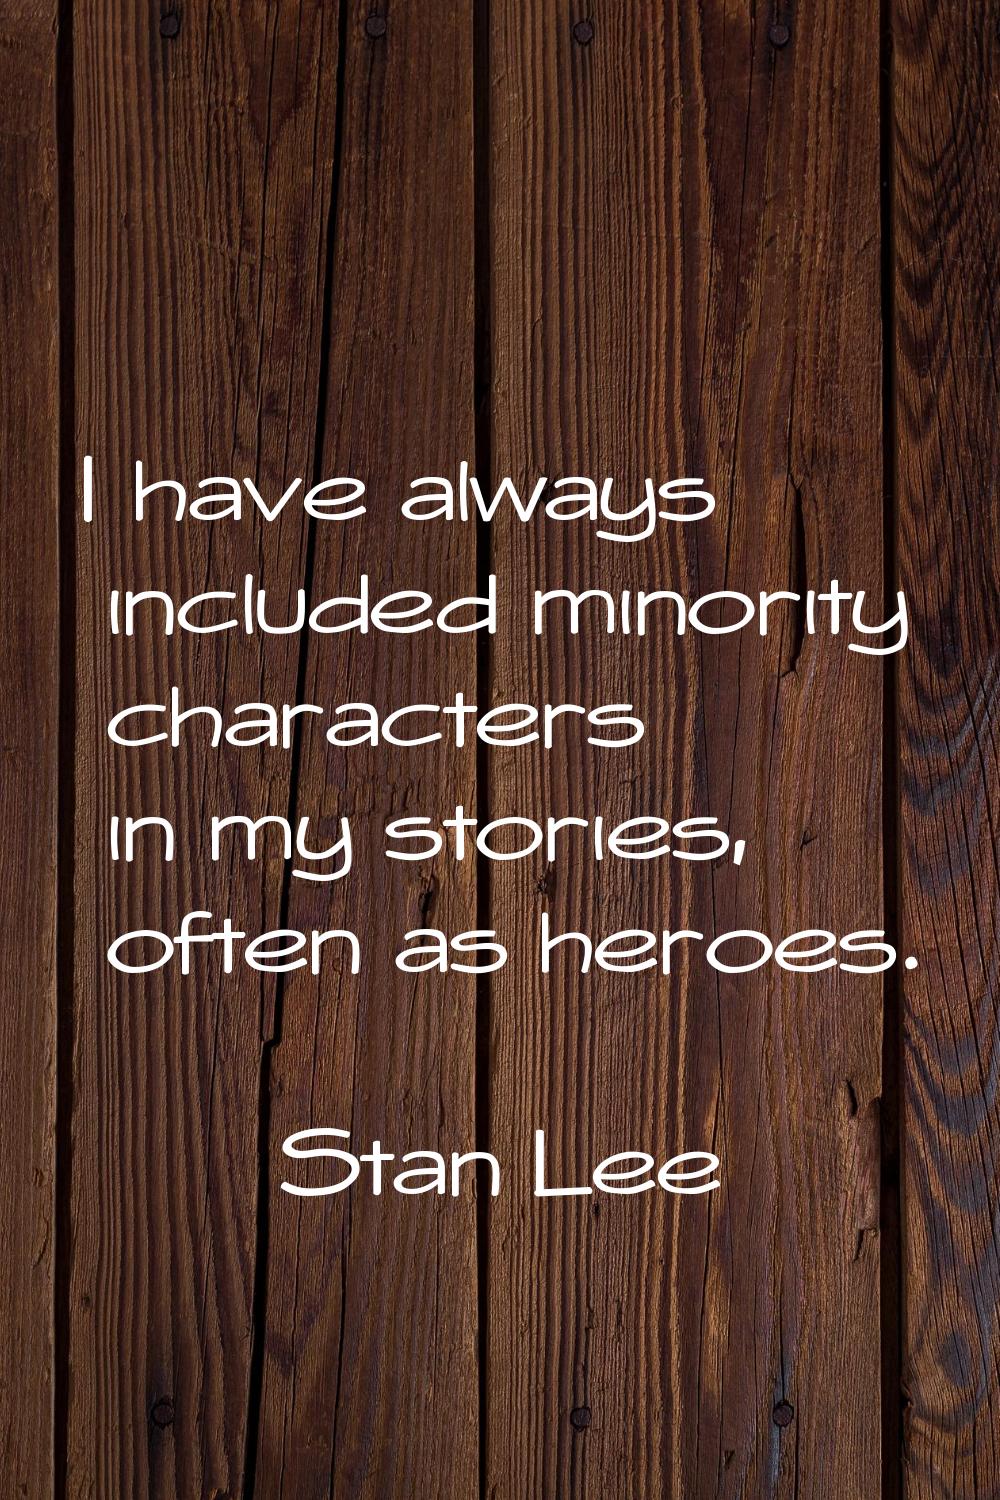 I have always included minority characters in my stories, often as heroes.